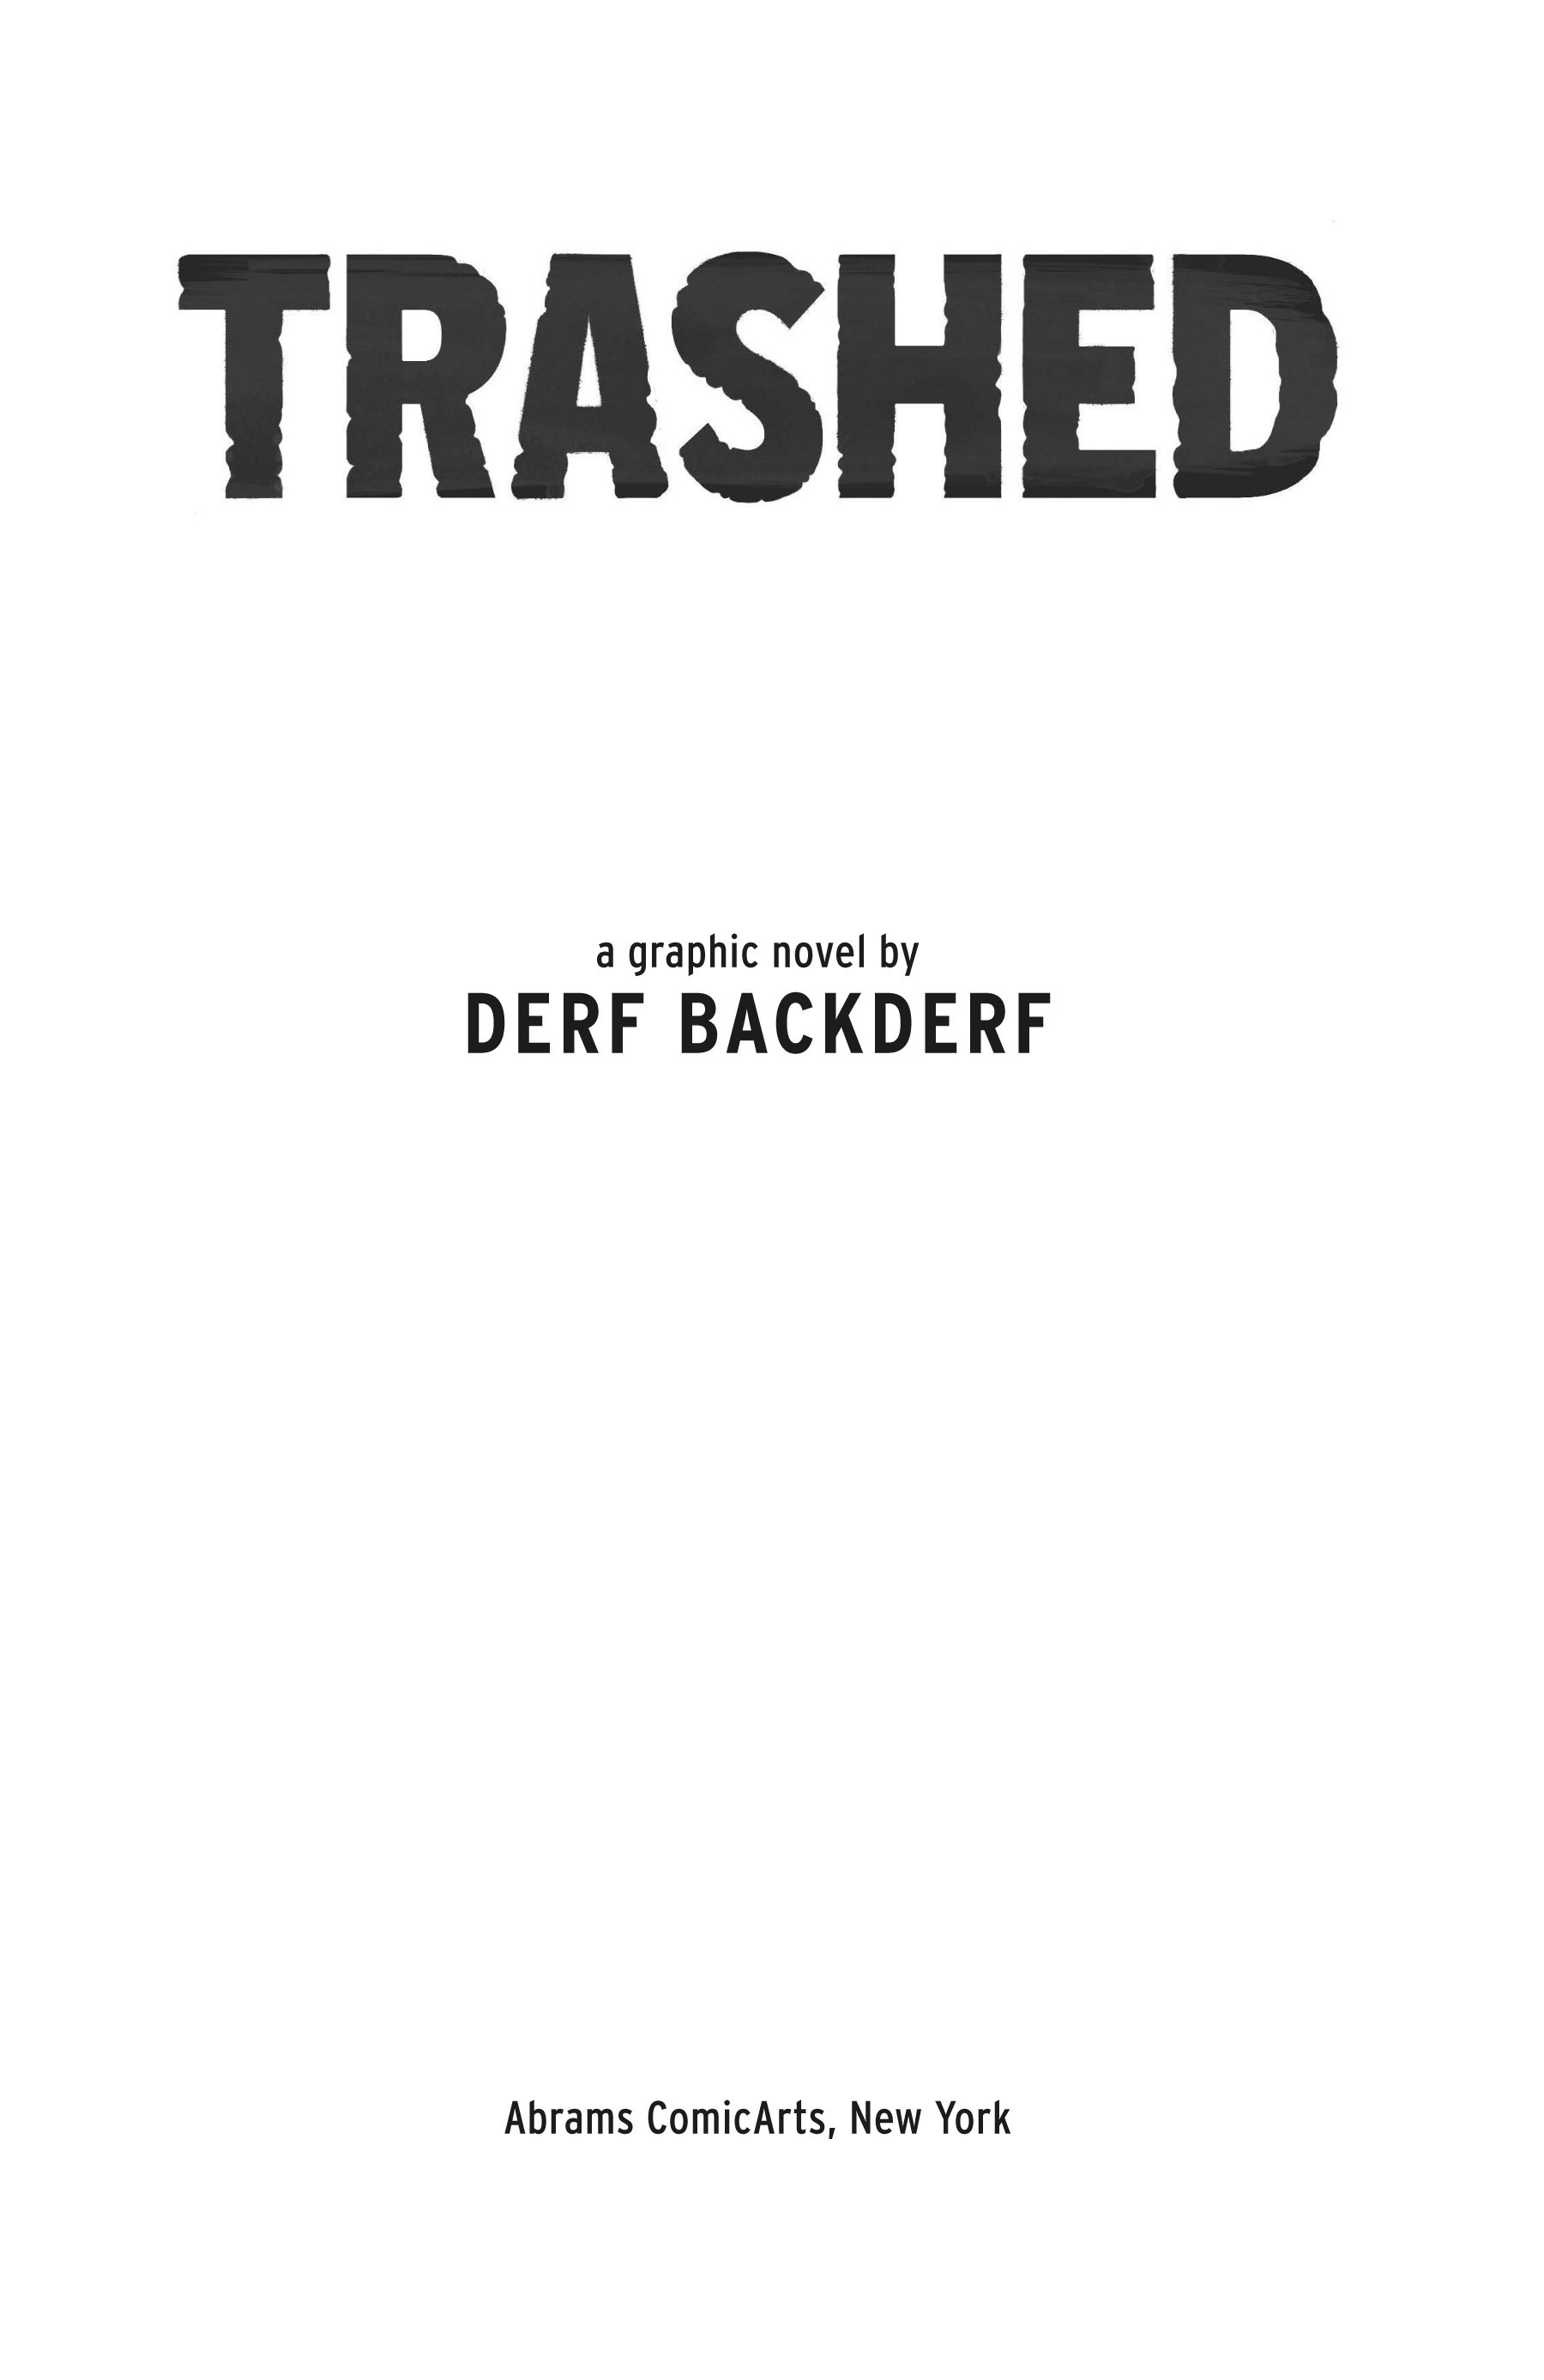 Read online Trashed comic -  Issue # Full - 6